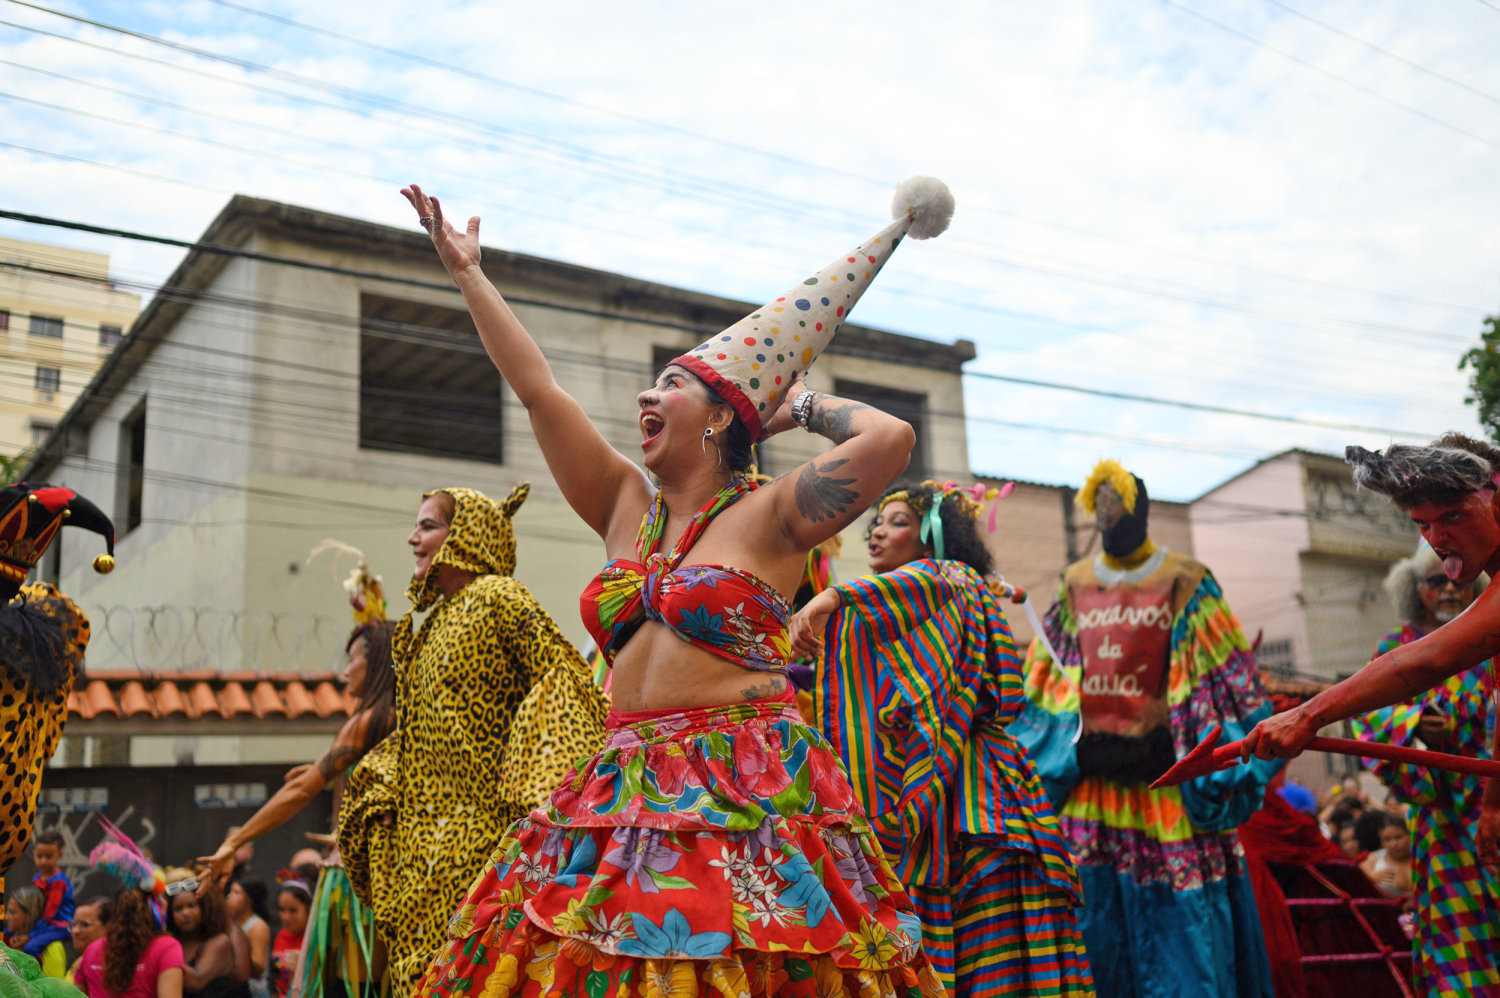 Brazil: What should I know before going to Carnaval in Salvador